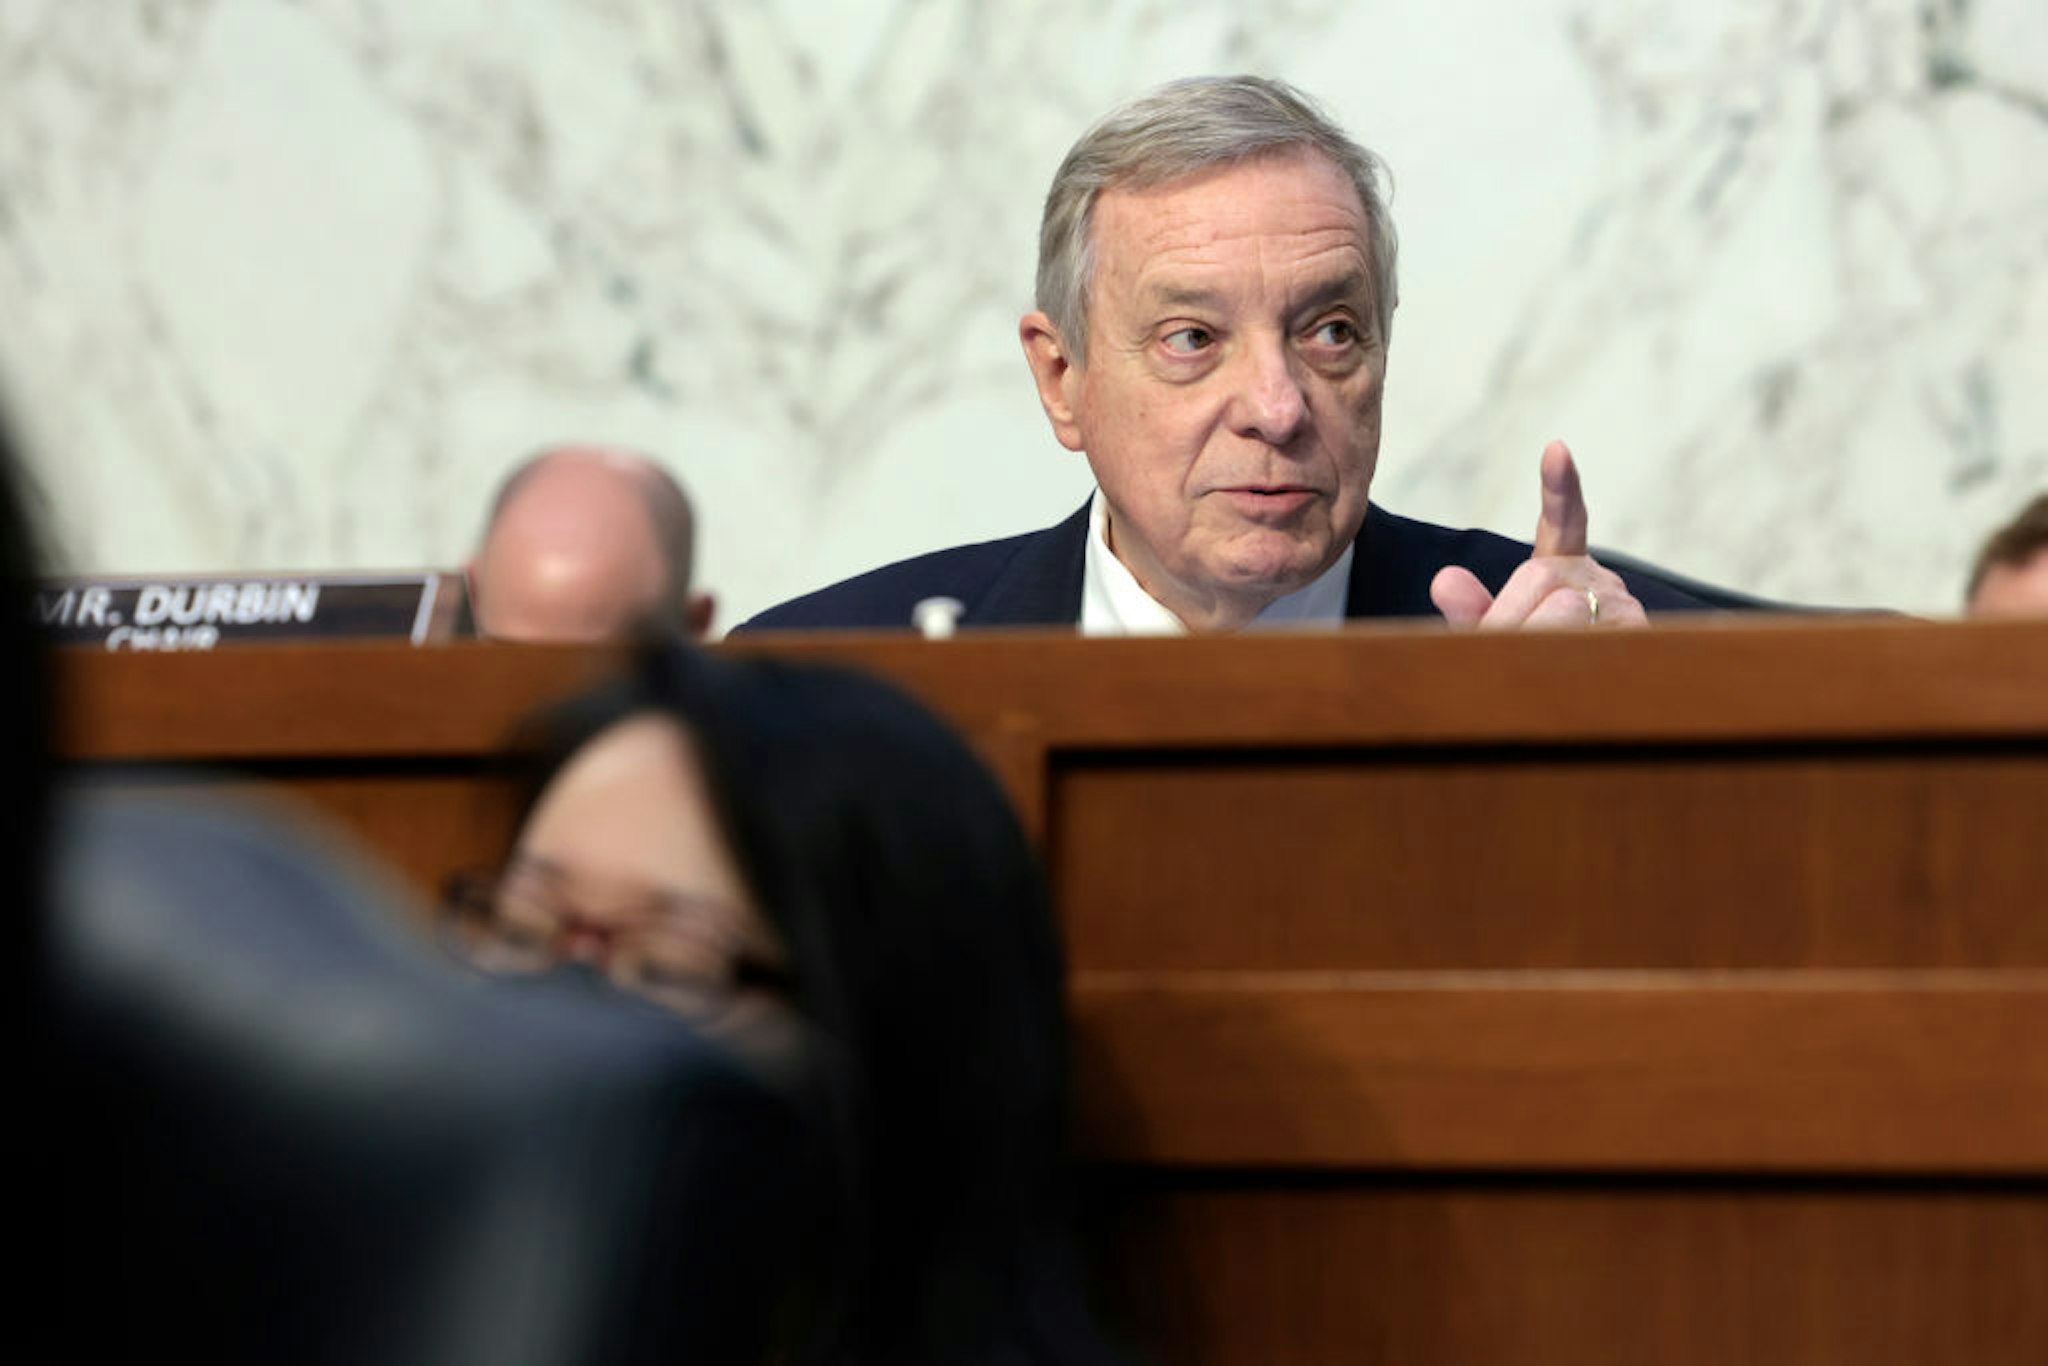 WASHINGTON, DC - APRIL 4: Committee chairman Sen. Dick Durbin (D-IL) listens during a Senate Judiciary Committee business meeting to vote on Supreme Court nominee Judge Ketanji Brown Jackson on Capitol Hill, April 4, 2022 in Washington, DC. A confirmation vote from the full Senate will come later this week. (Photo by Anna Moneymaker/Getty Images).